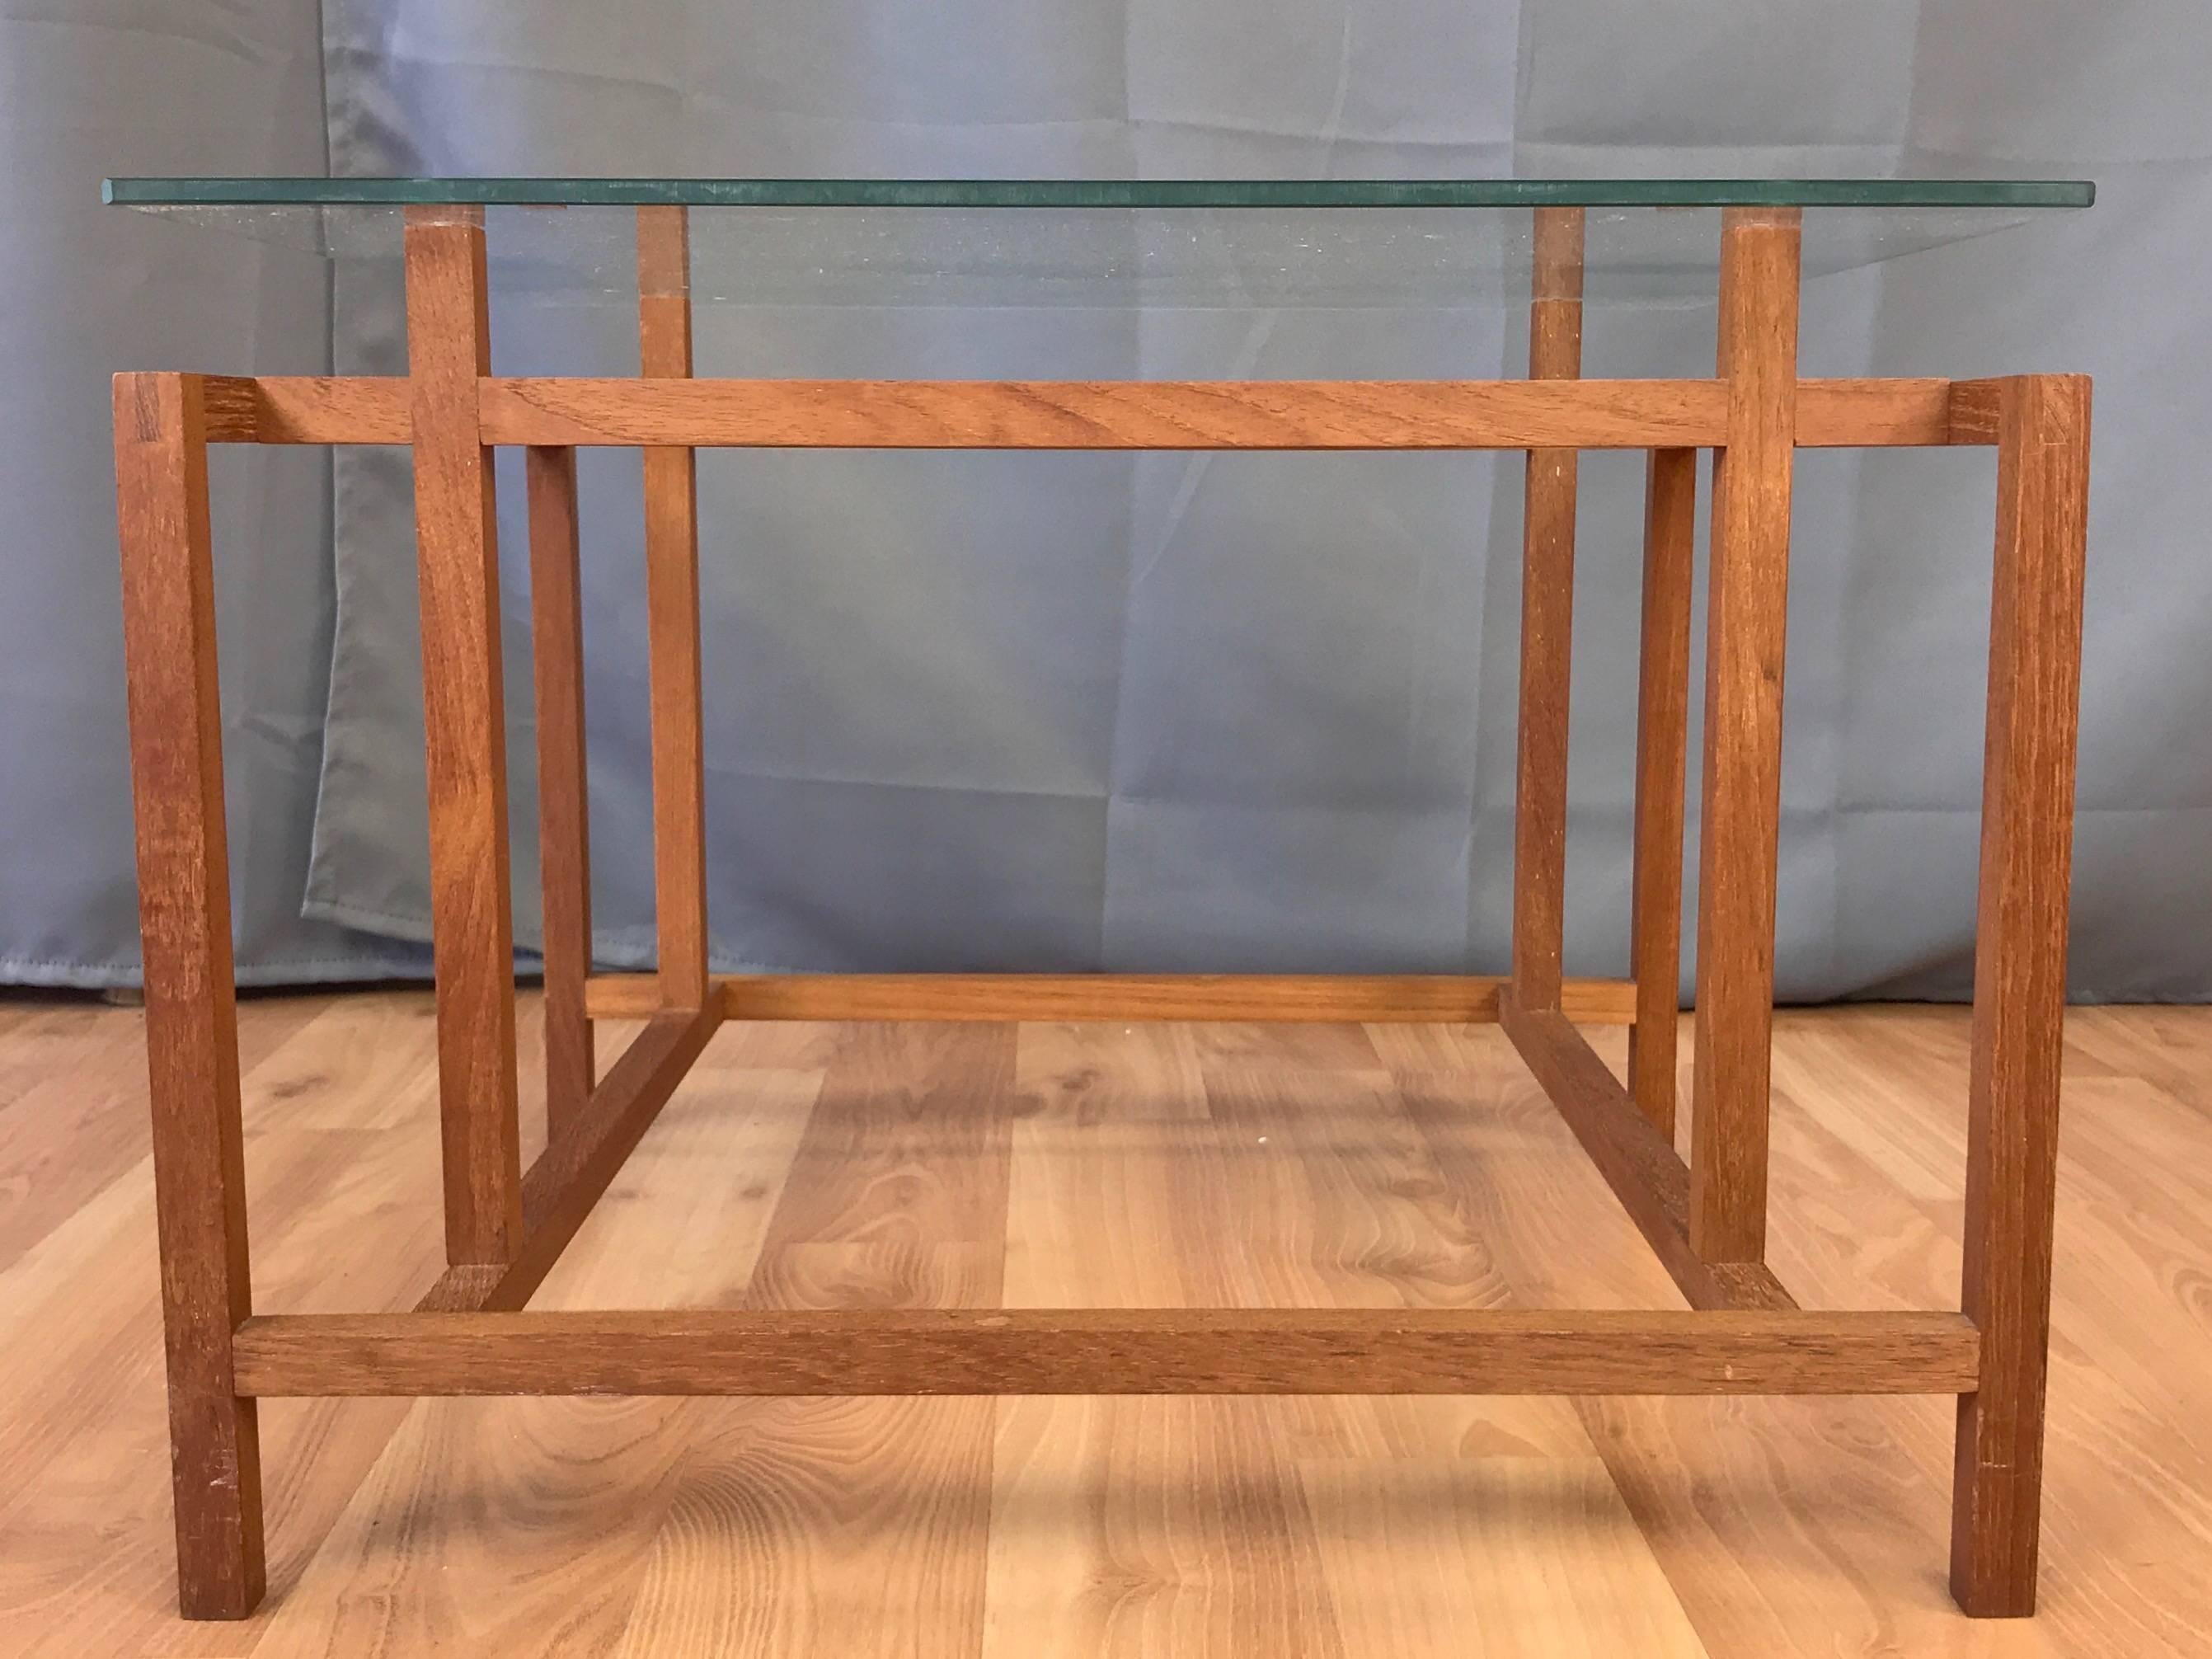 An architectural teak side or end table with glass top by Henning Nørgaard for Komfort.

Minimalist geometric solid teak base displays excellent craftsmanship, with both mortise-and-Tenon and finger joinery. Has original glass top. Retains